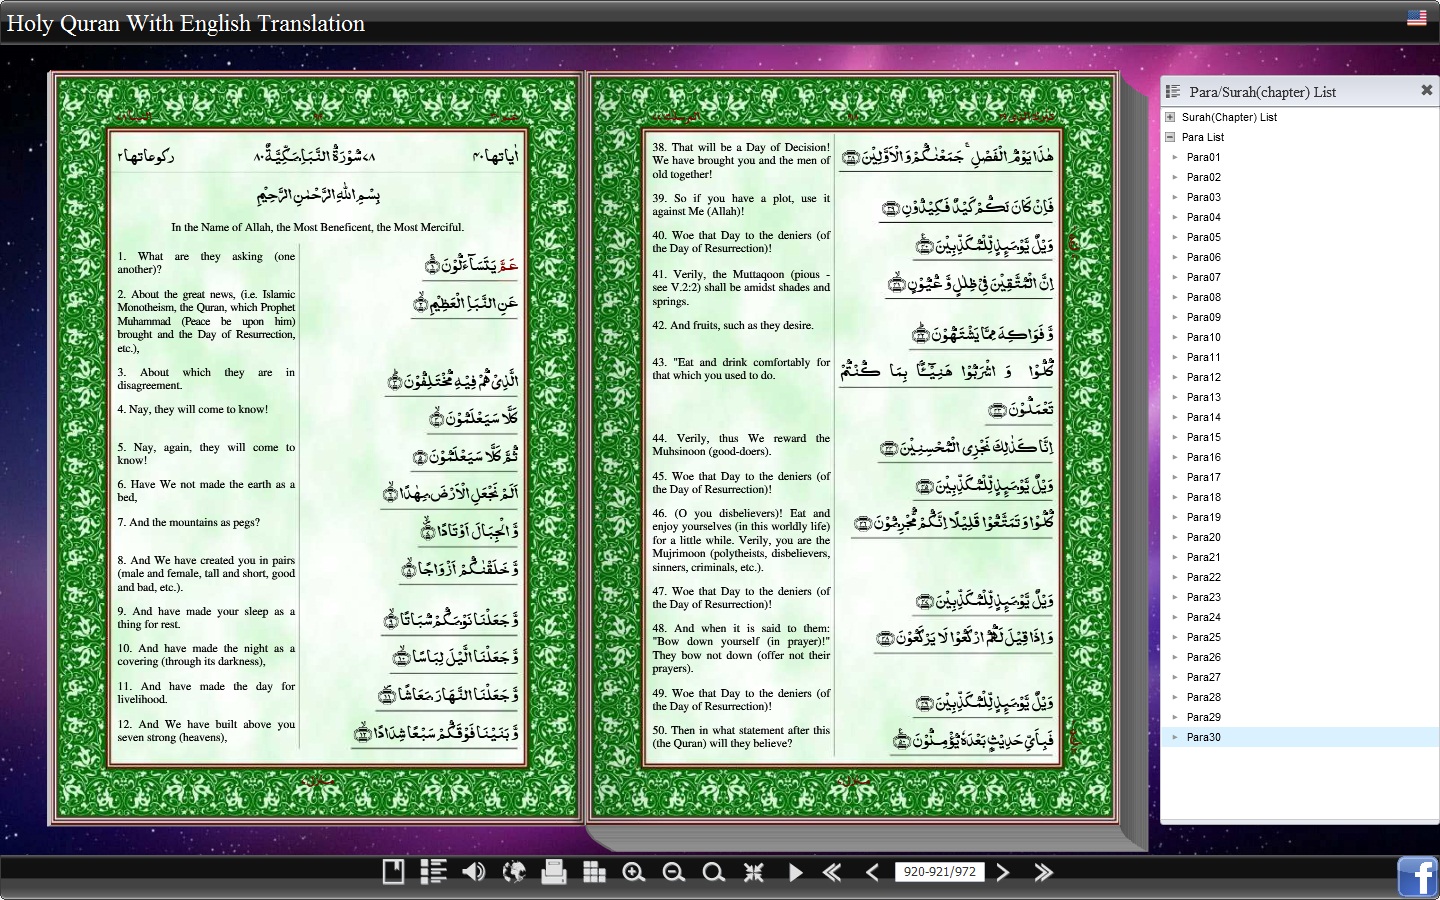 Can the Qur'an be read online in English?